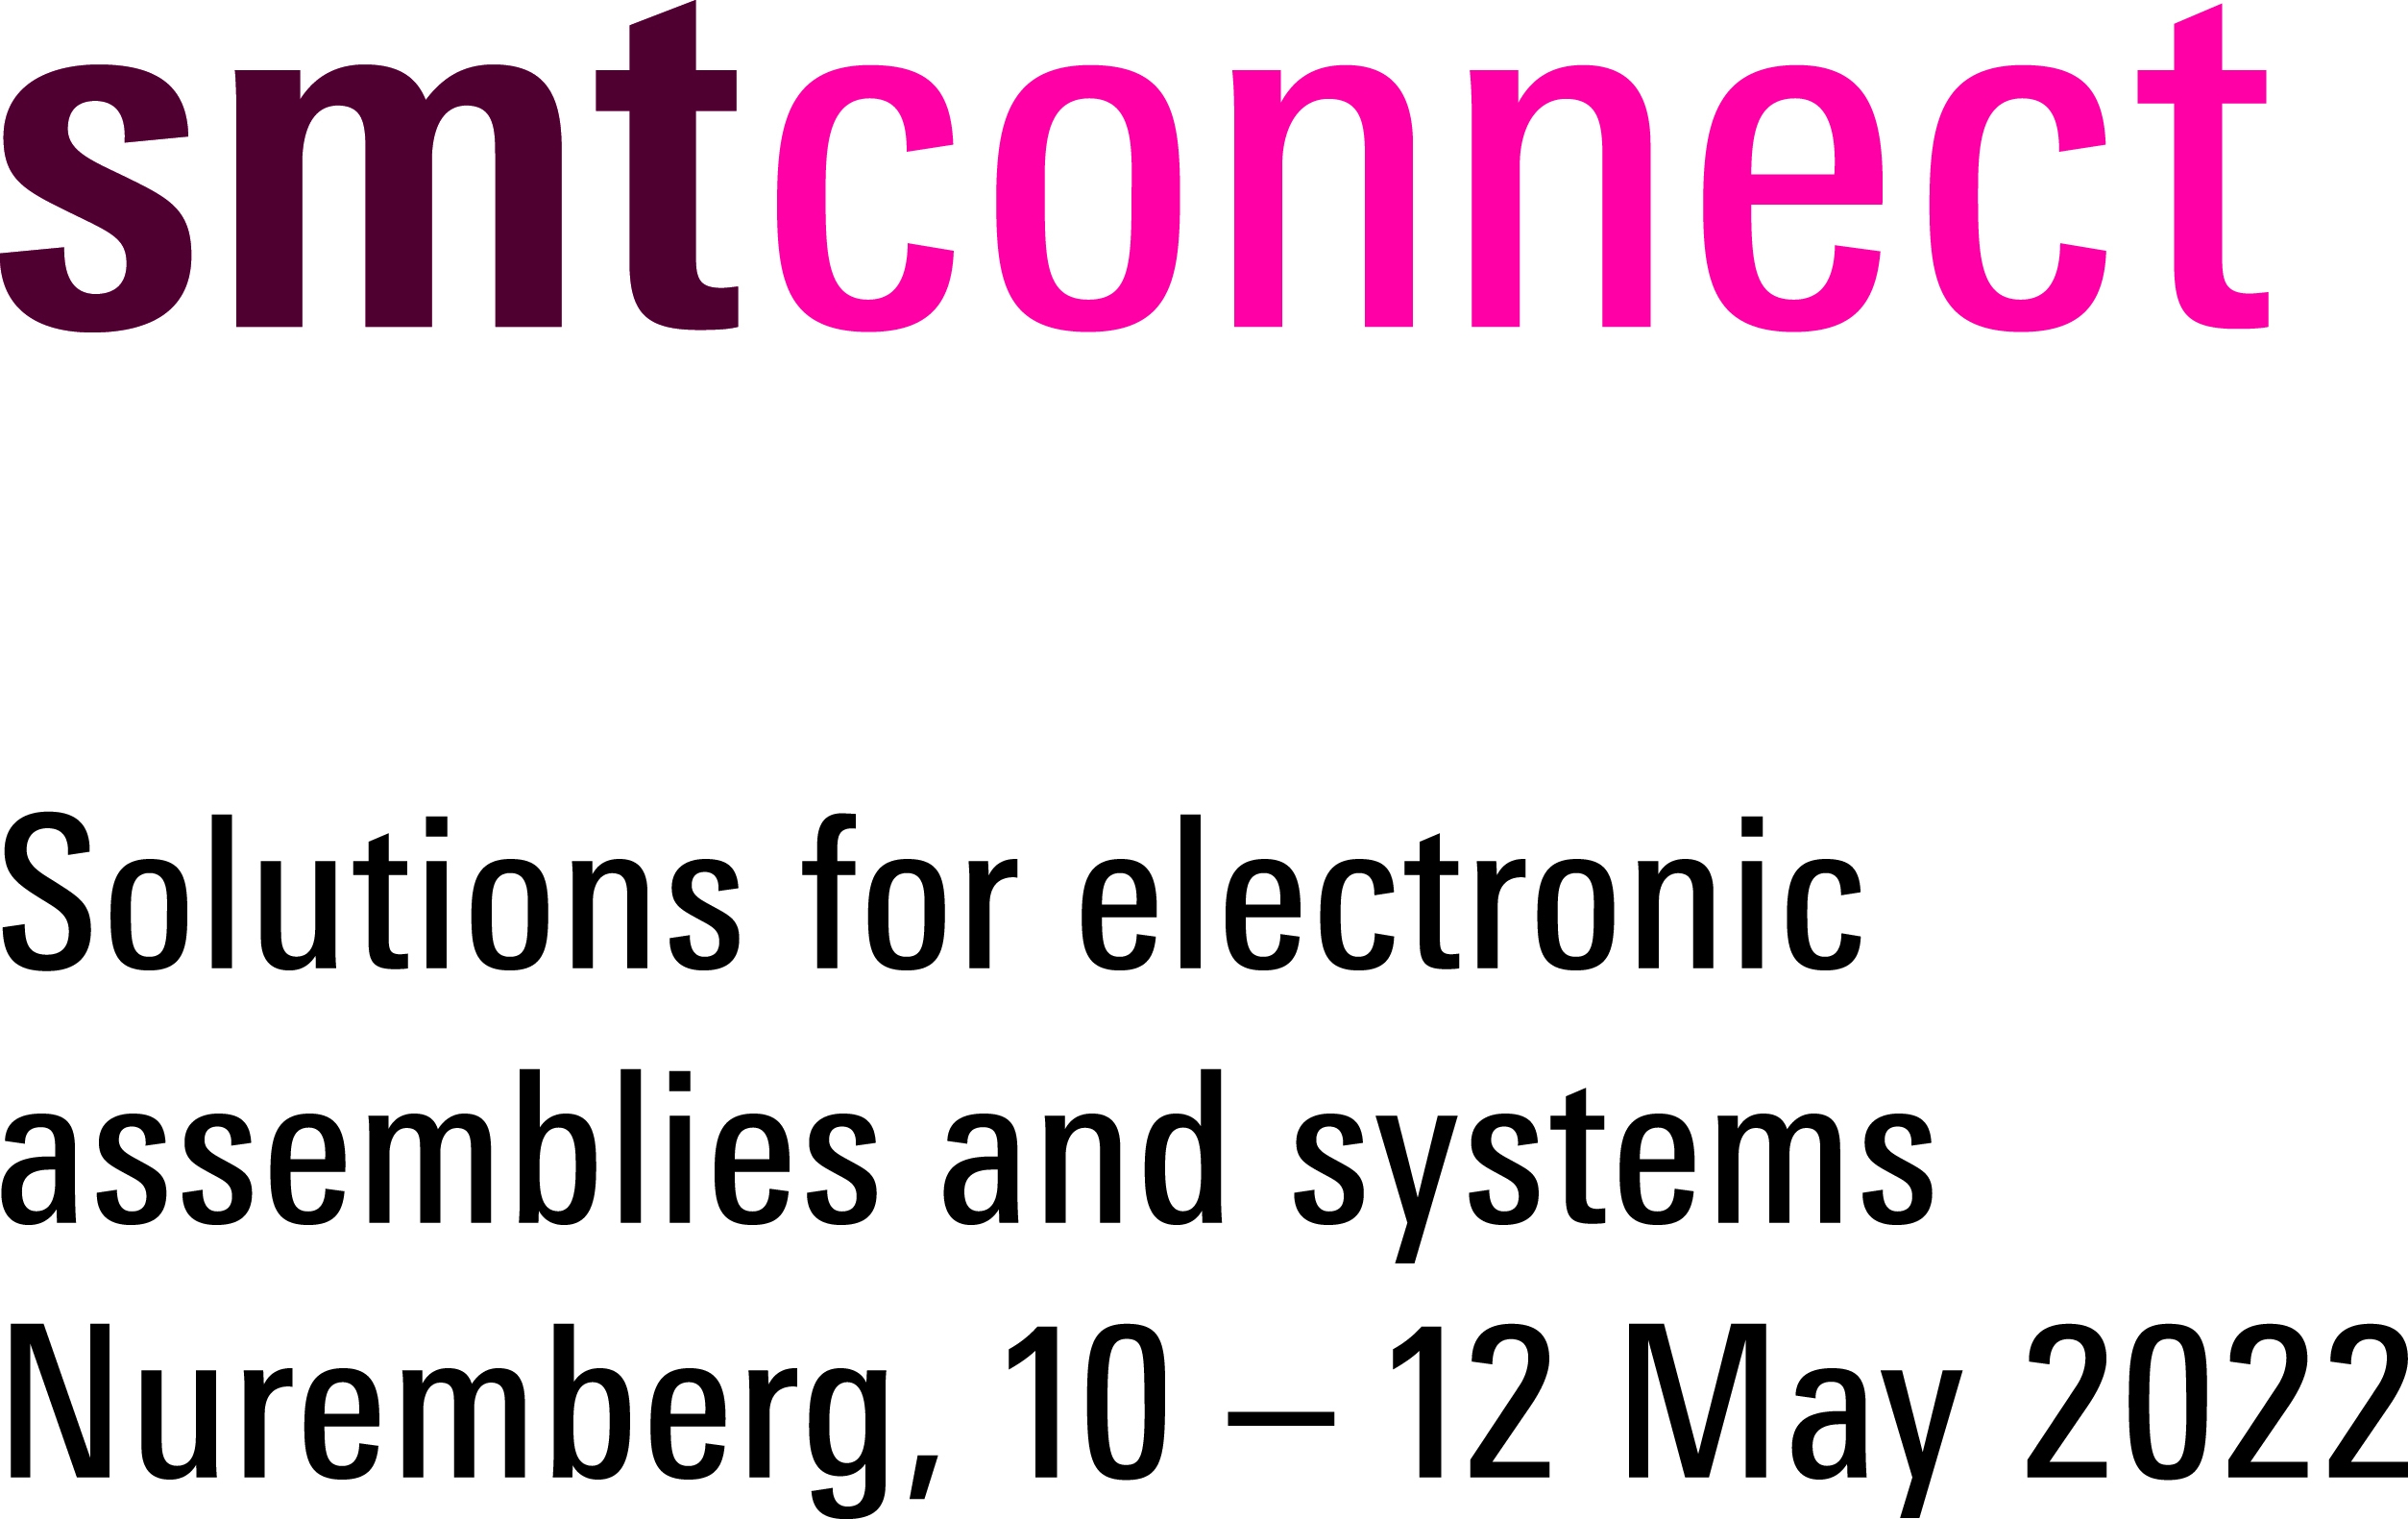 SMTconnect exhibition is on 10-12 May in Nurnberg